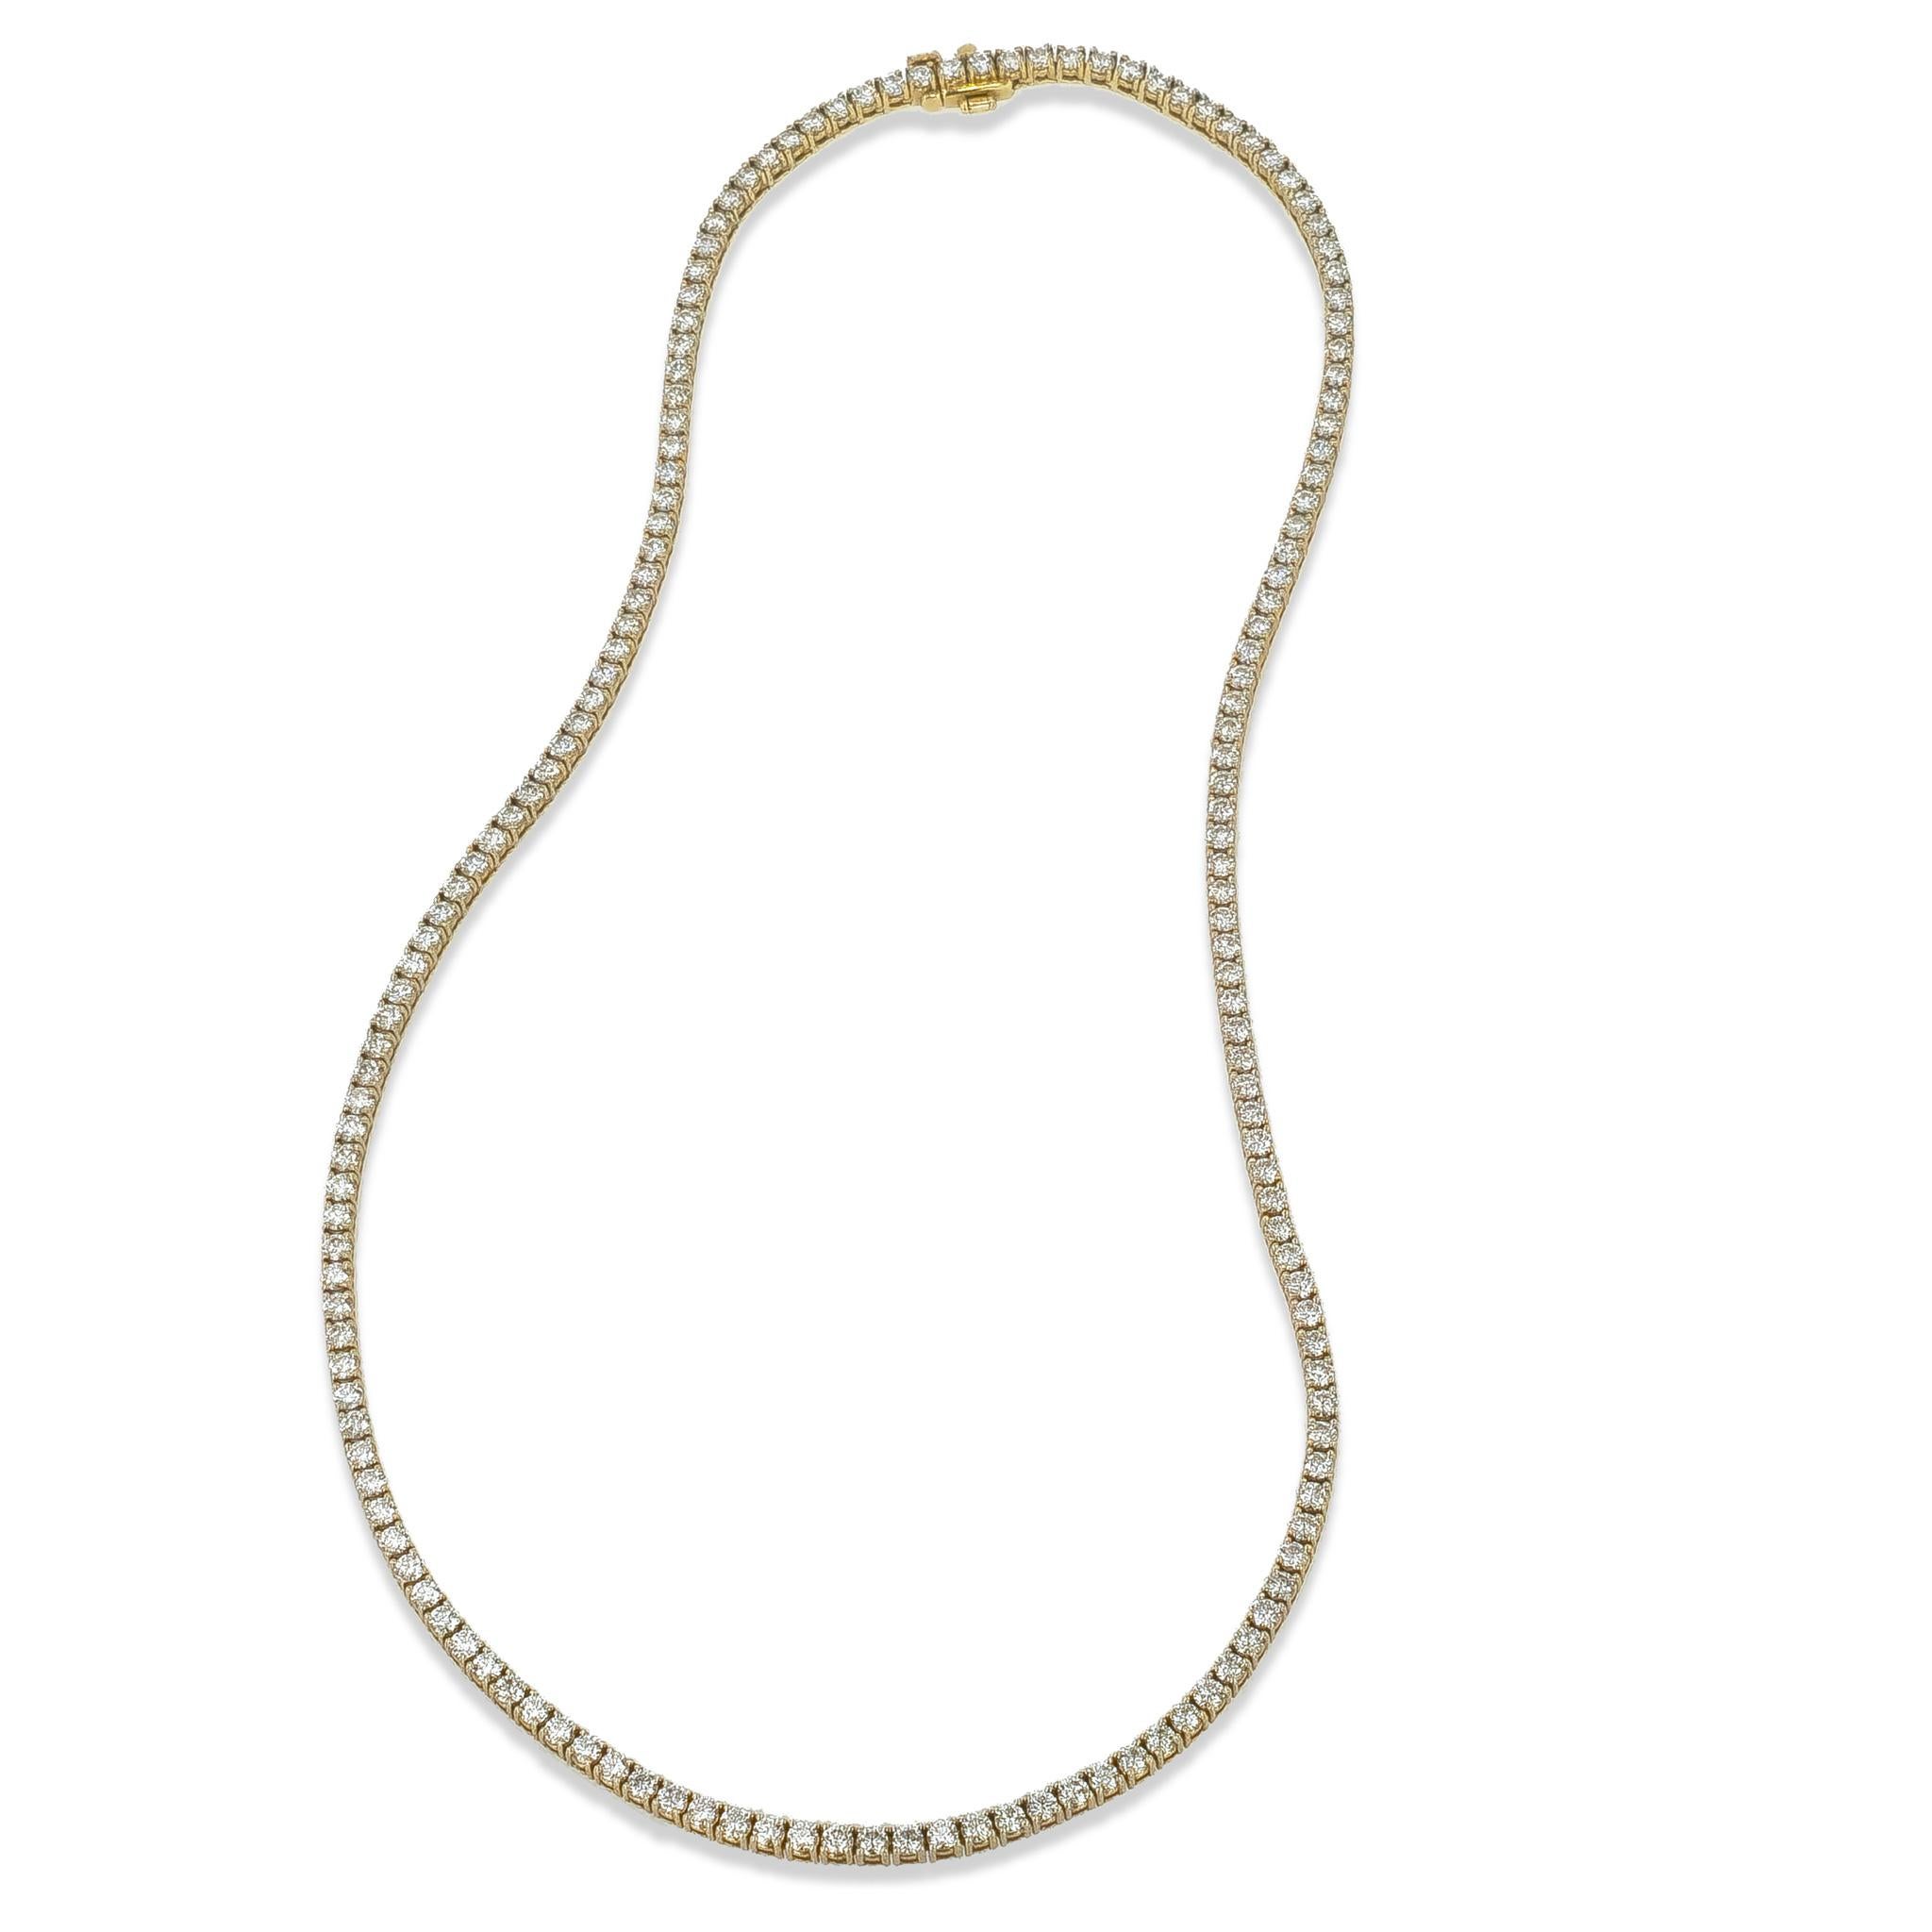 This stunning 18 karat yellow gold tennis necklace from the handmade H & H Jewels collection is adorned with 9.01 carat total weight of exquisitely cut F/G VS1 (EX,EX) diamonds, each weighing 0.057ct. 

At 17